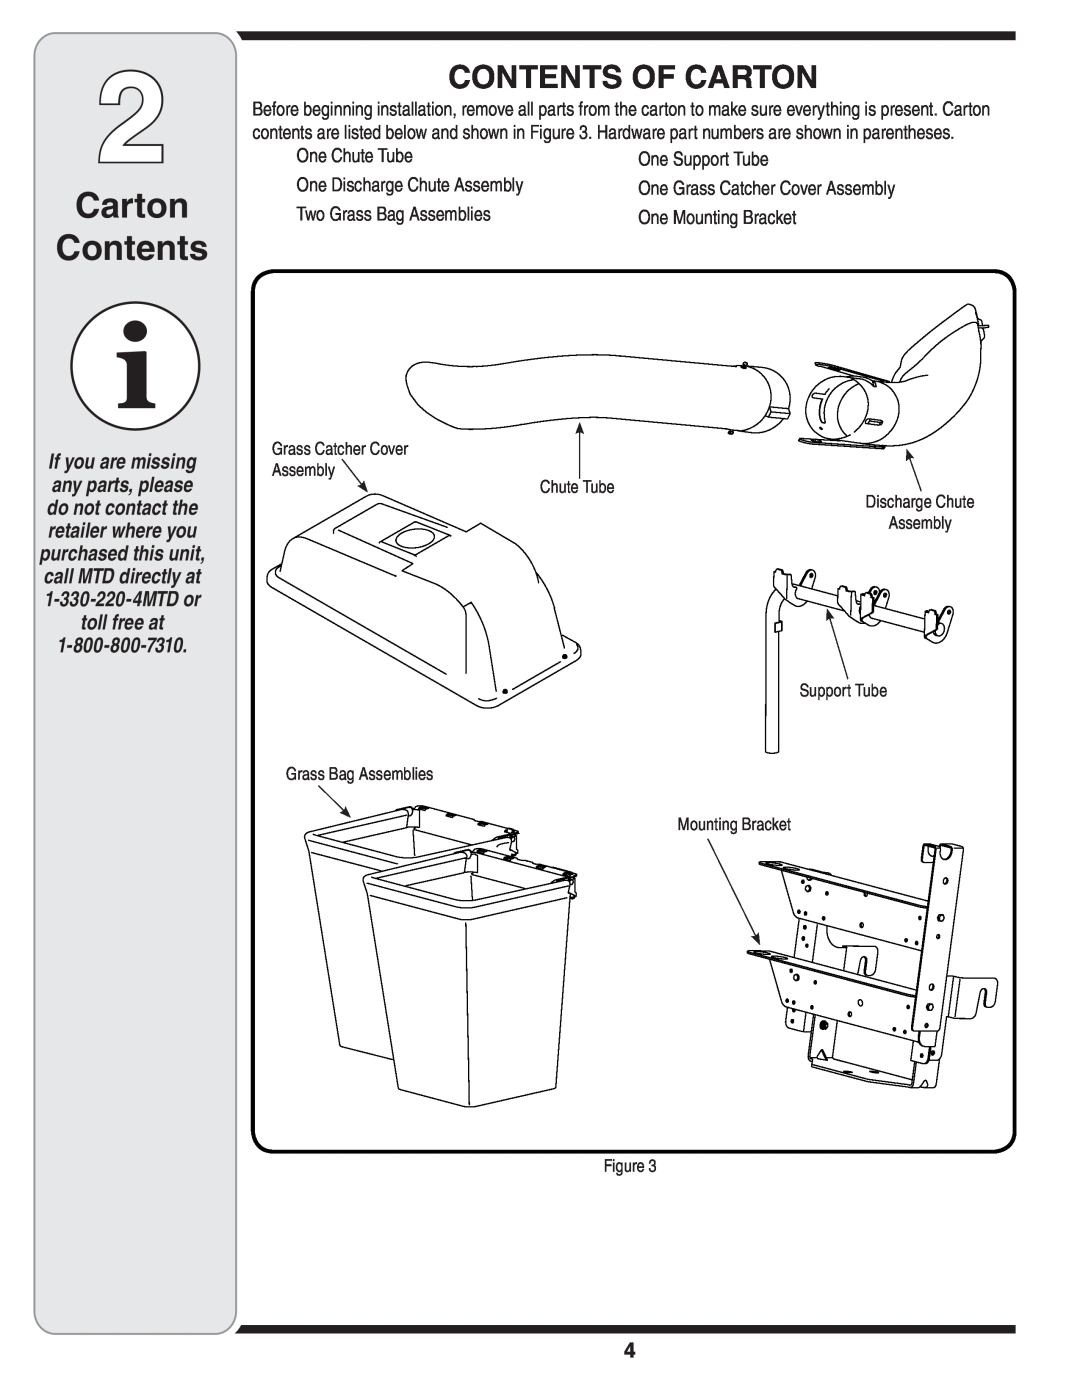 MTD 190-180, 90-182 warranty Carton Contents, Contents Of Carton, toll free at, One Chute Tube 